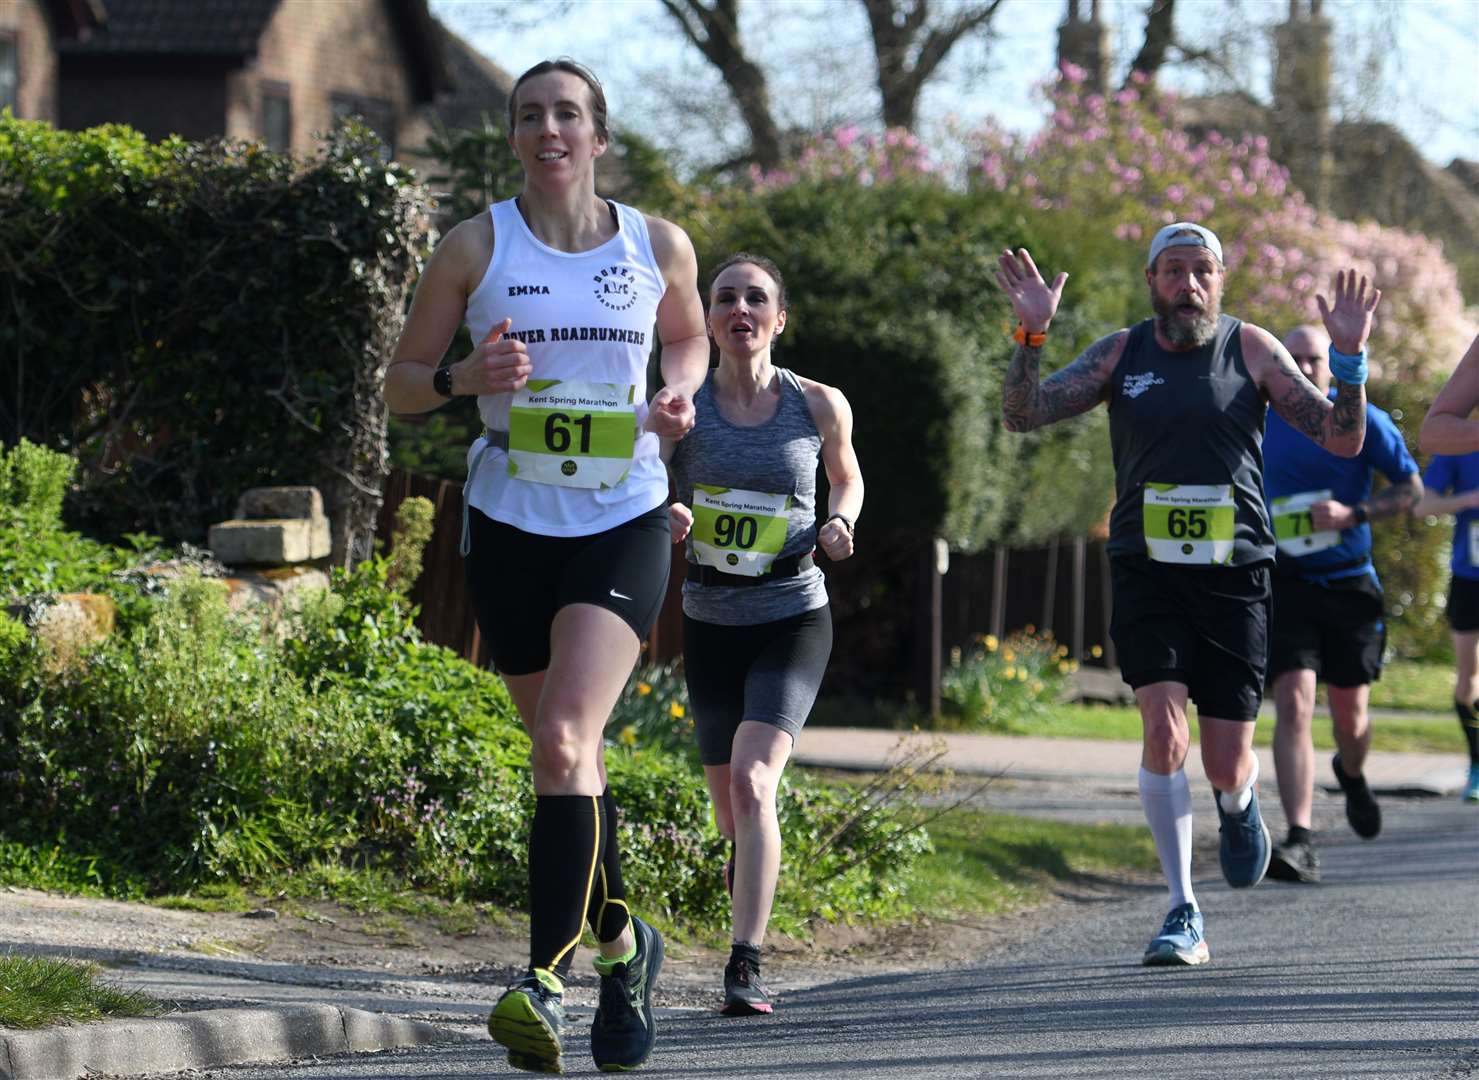 Emma Stockley (61) of Dover Road Runners was second female back. Picture: Barry Goodwin